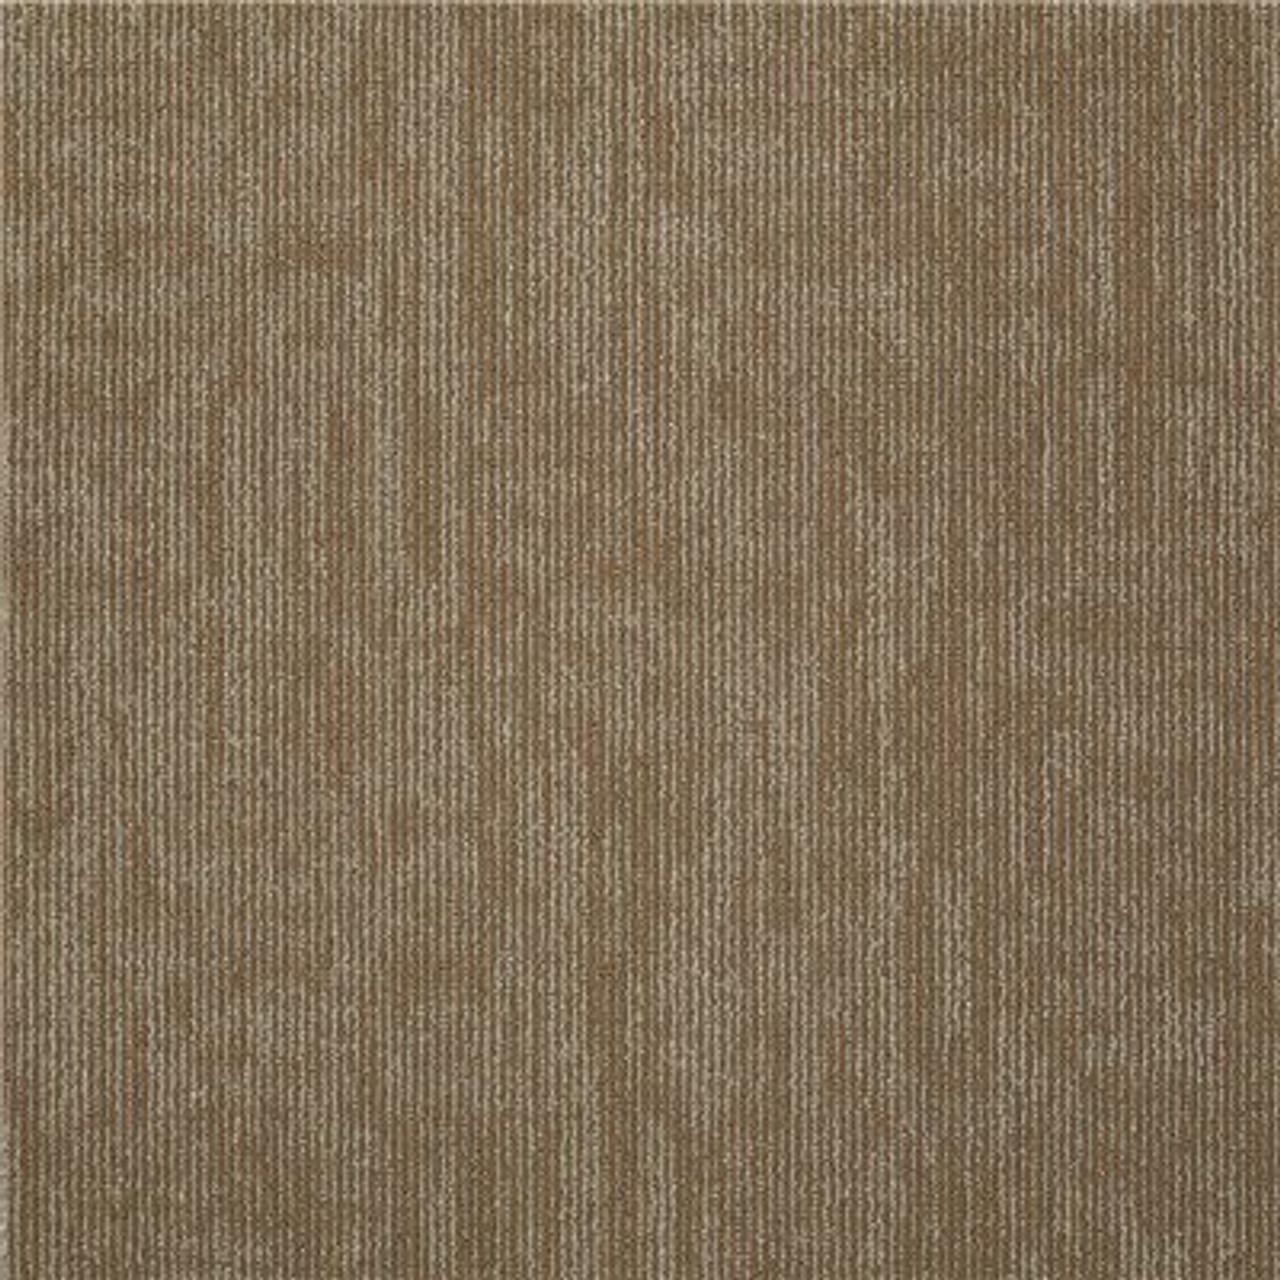 Shaw Graphix French Peach Loop Commercial 24 In. X 24 In. Glue Down Carpet Tile (12-Tile/Case)